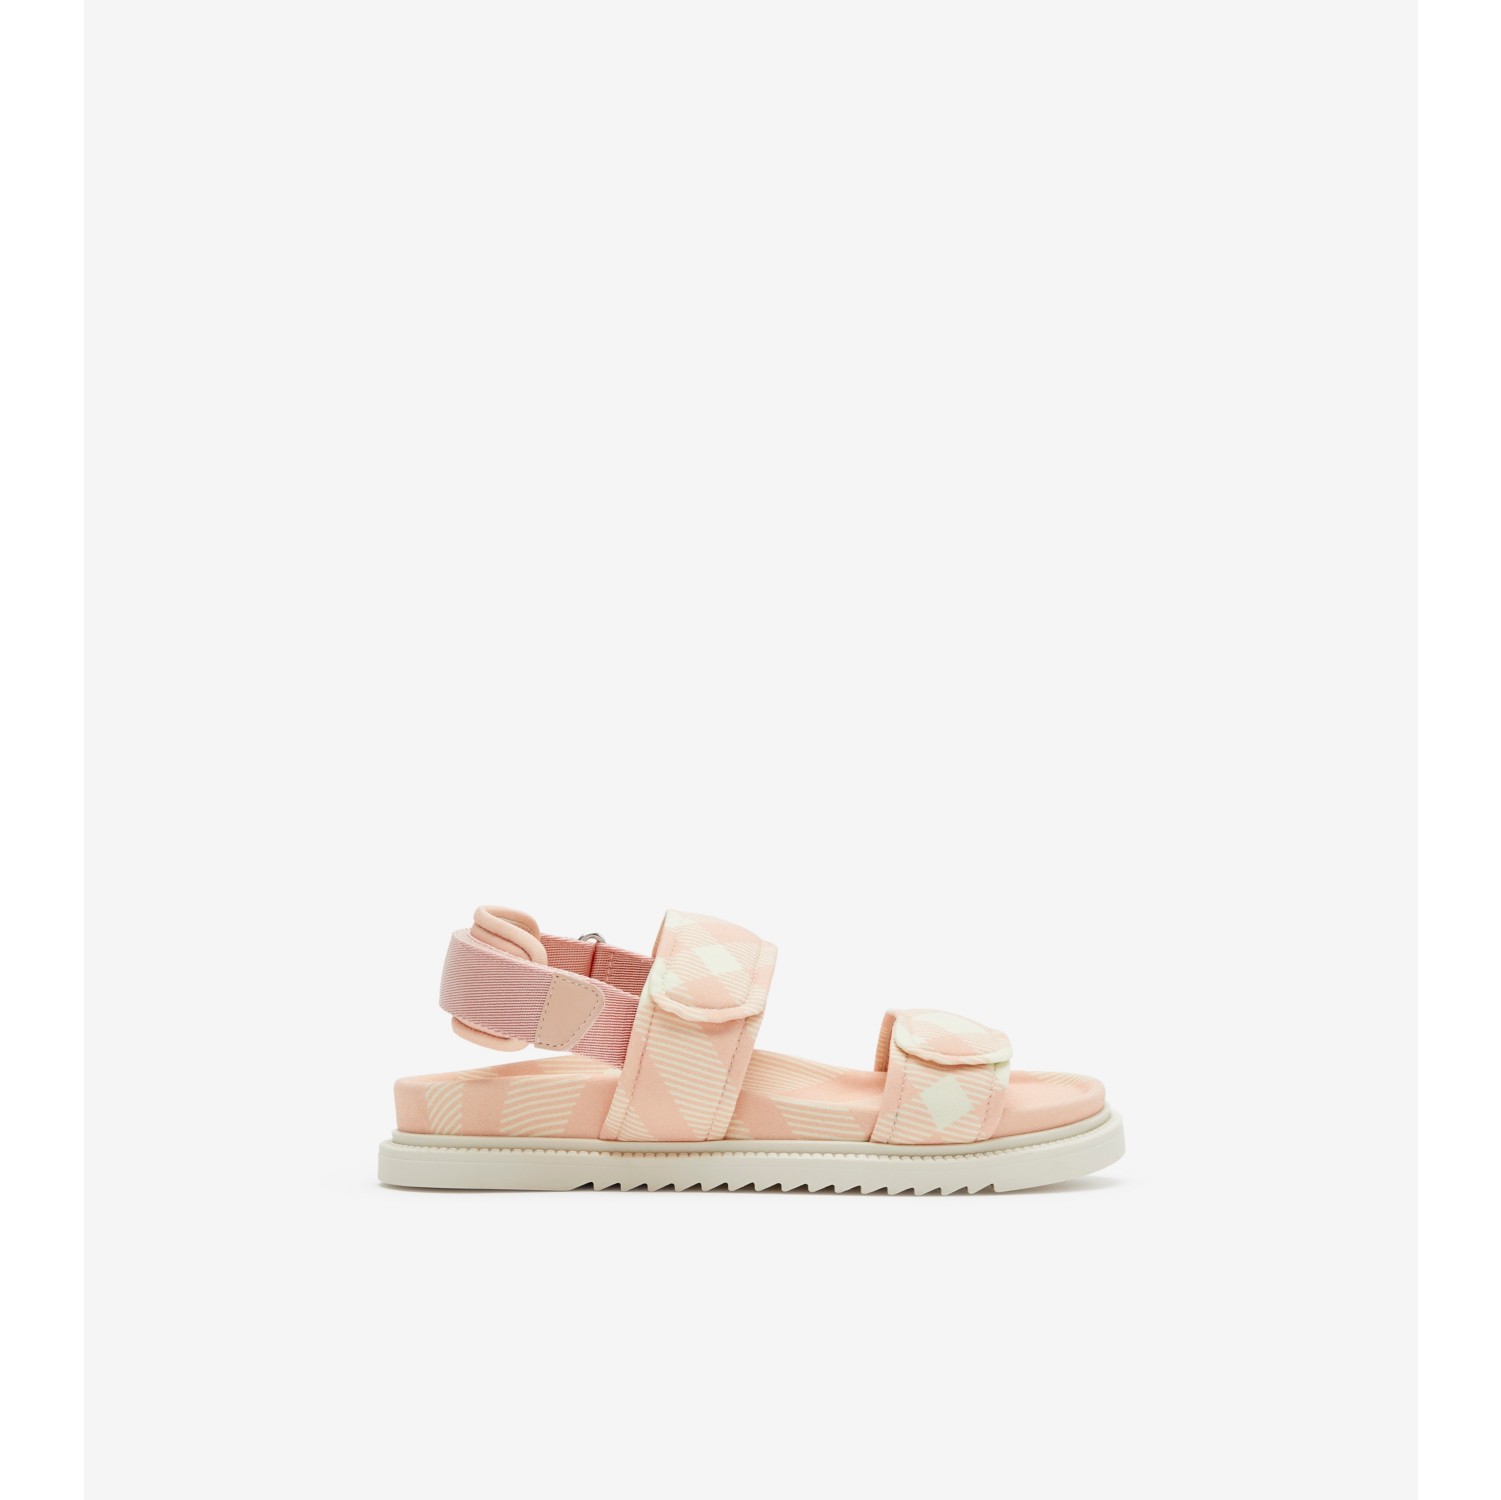 Check Sandals in Cool rose pink - Children | Burberry® Official